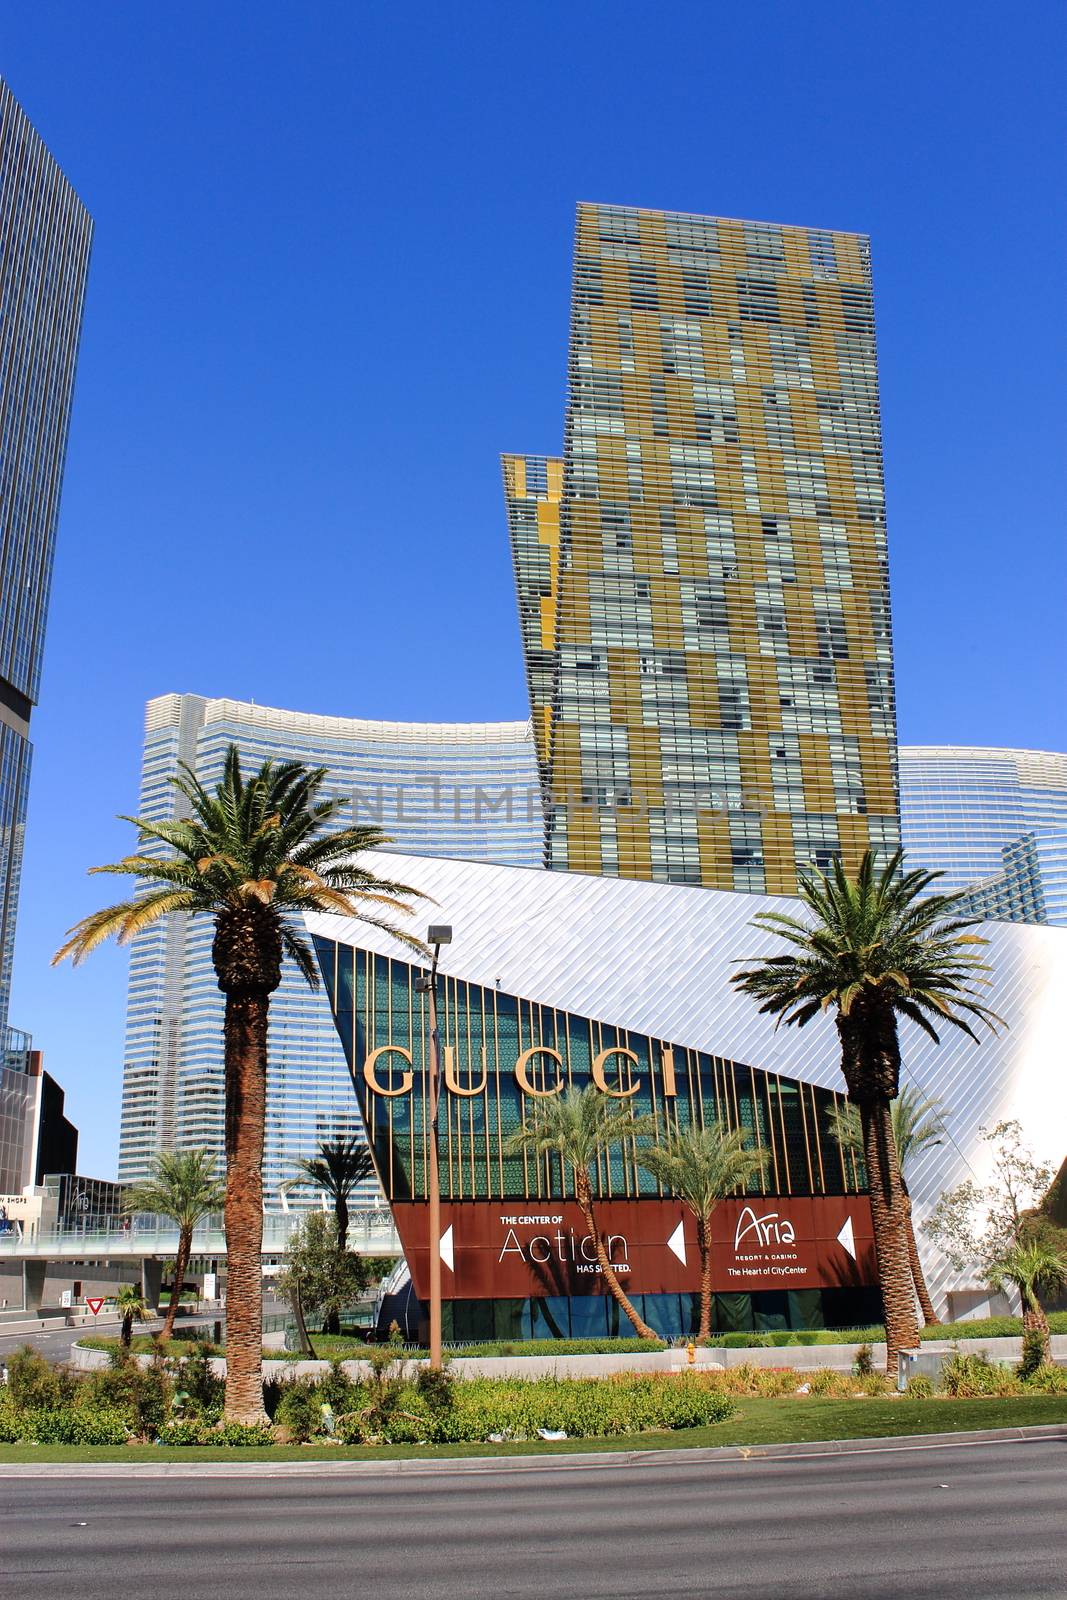 Gucci store shopping on the famous Las Vegas Strip.